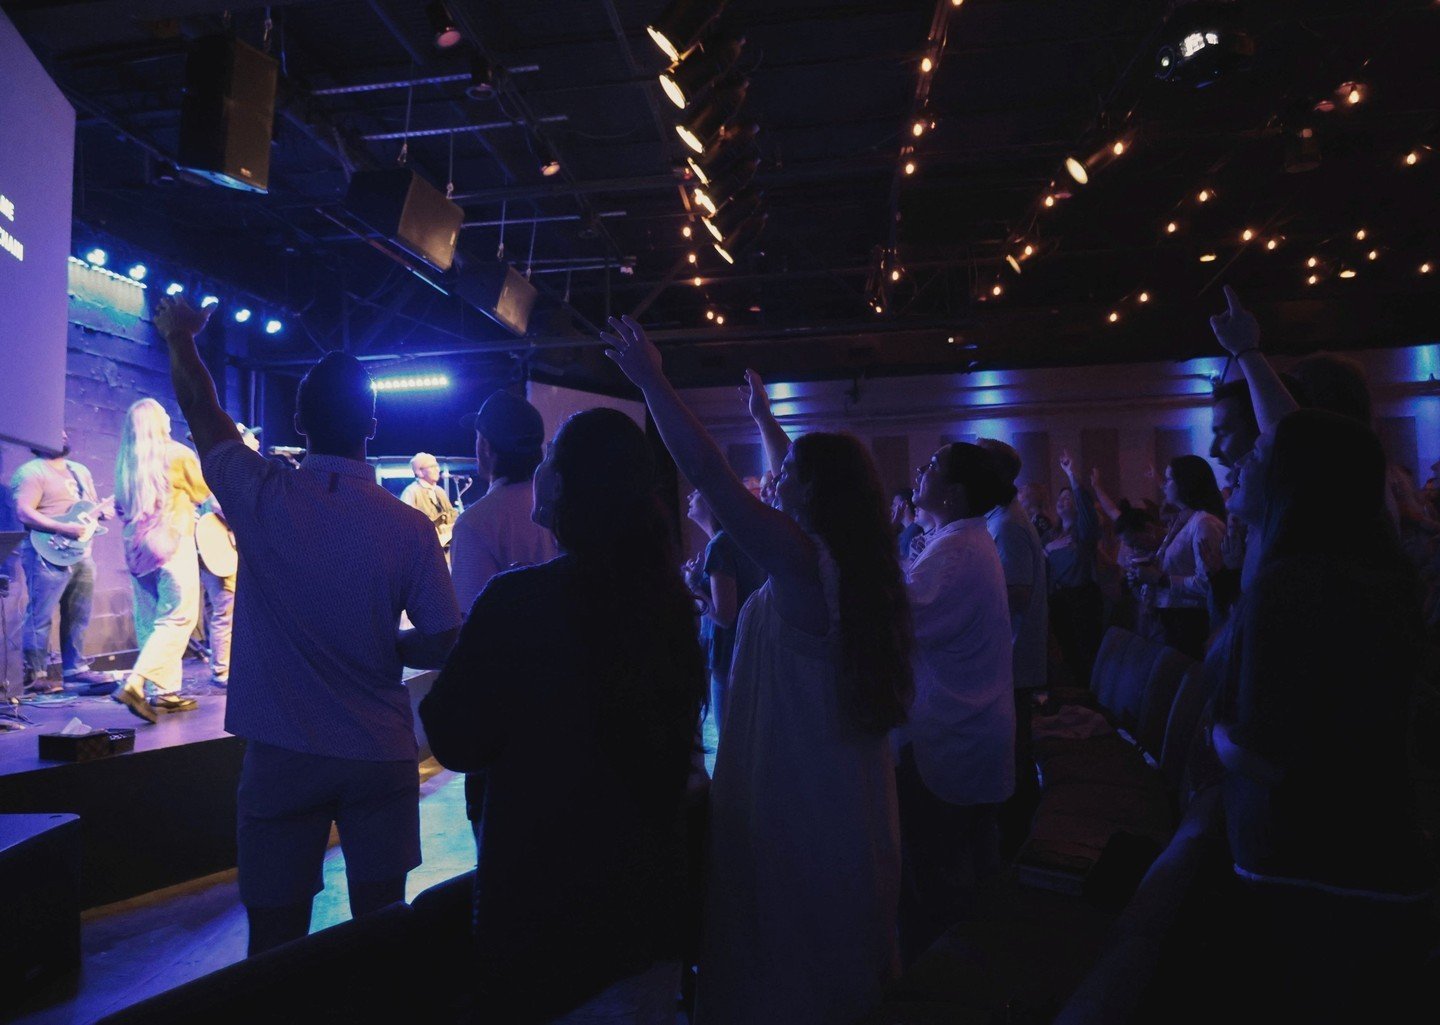 Your cross, my freedom⁠
Your stripes and my healing⁠
All praise King Jesus⁠
Glory to God in Heaven⁠
Your blood, still speaking⁠
Your love is still reaching⁠
All praise King Jesus⁠
Glory to God forever⁠
⁠
Son of Suffering by Bethel Music